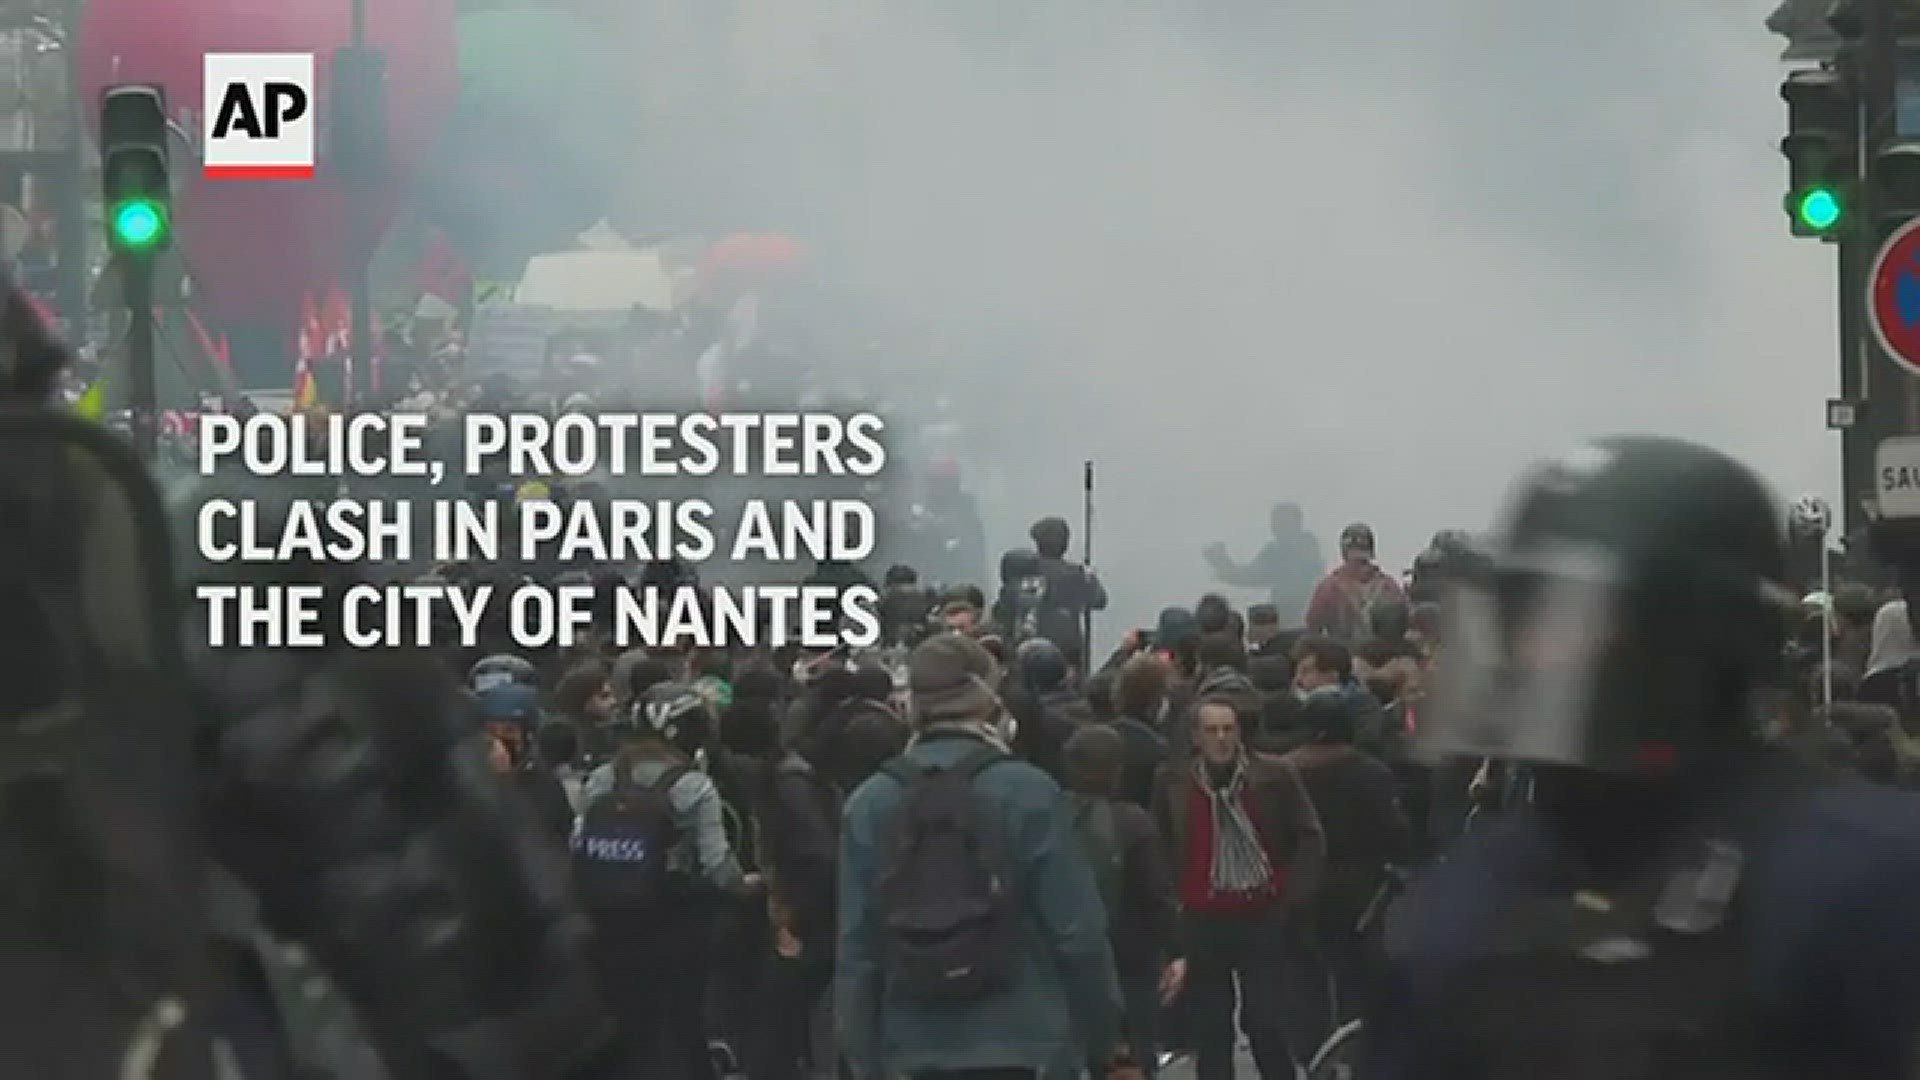 Police fired tear gas at protesters in Paris where crowds took to the streets in the first mass demonstrations since President Macron announced pension changes.